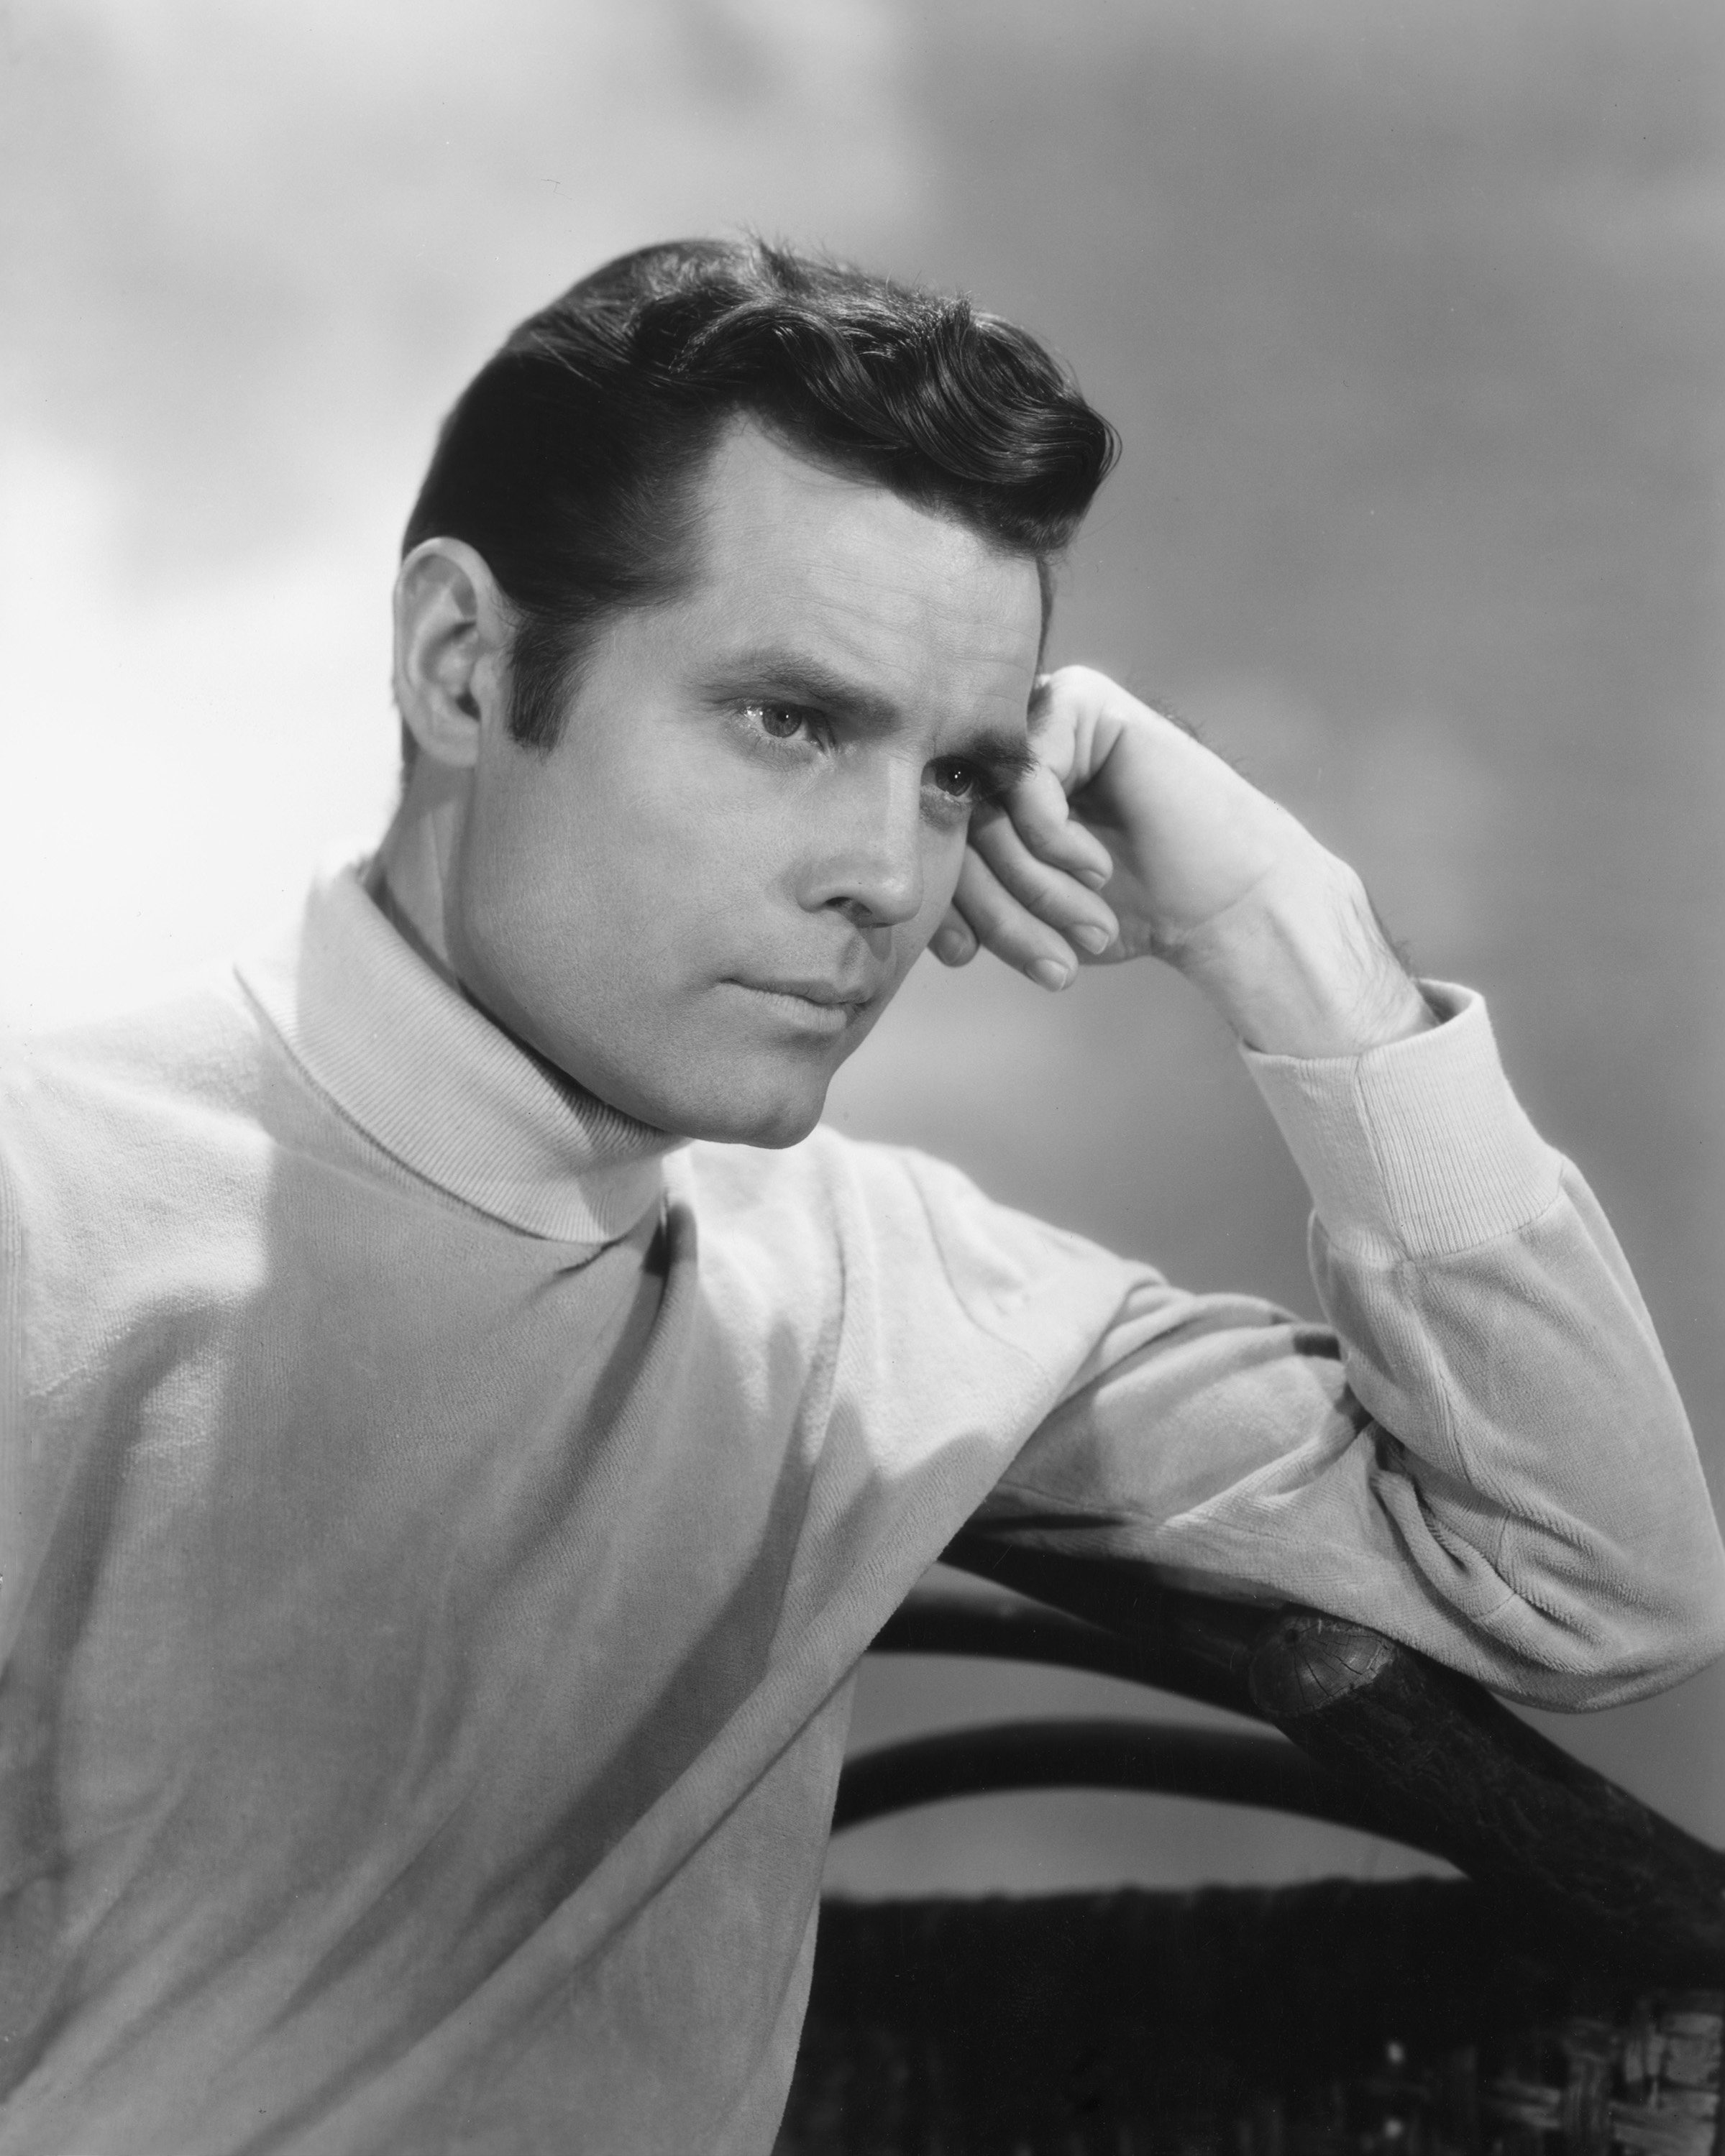 Jack Lord (1920-1998), US actor, wearing a white polo neck jumper and posing with his head resting against his hand, in a studio portrait, circa 1950. | Source: Getty Images